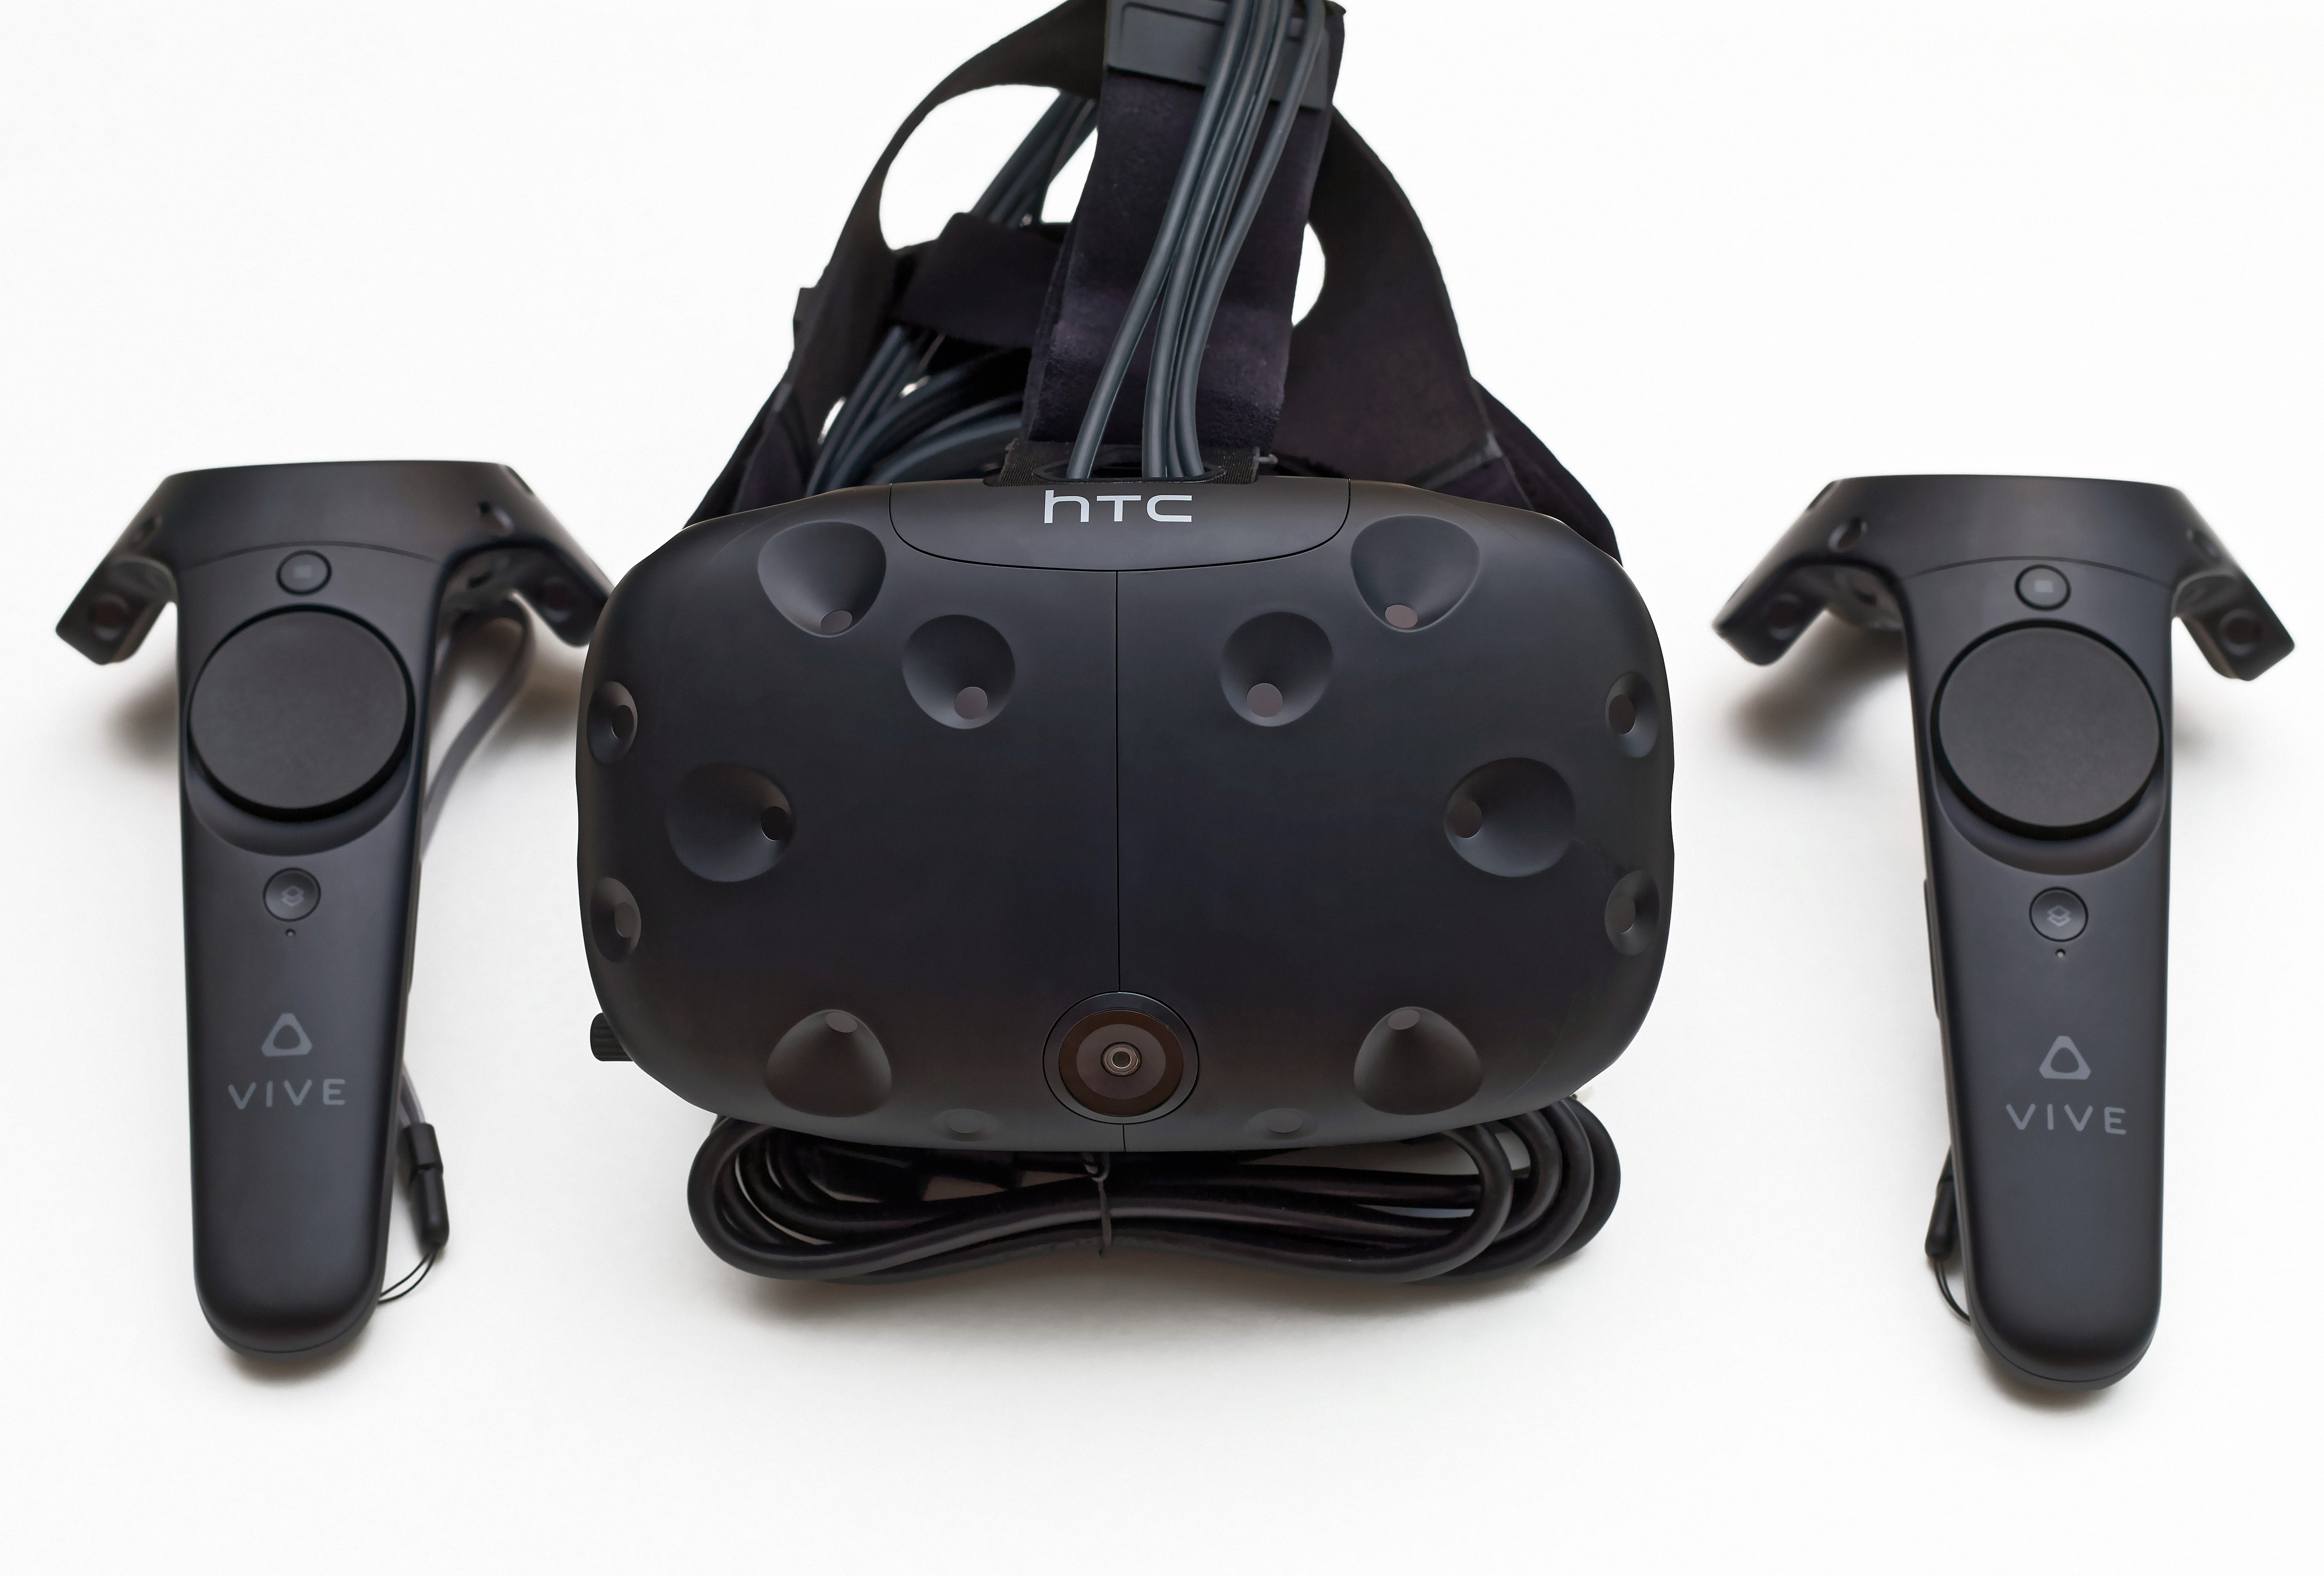 Situation garage Clip sommerfugl For this gadgethead, the HTC Vive may force my Oculus Rift to collect dust  | Ars Technica